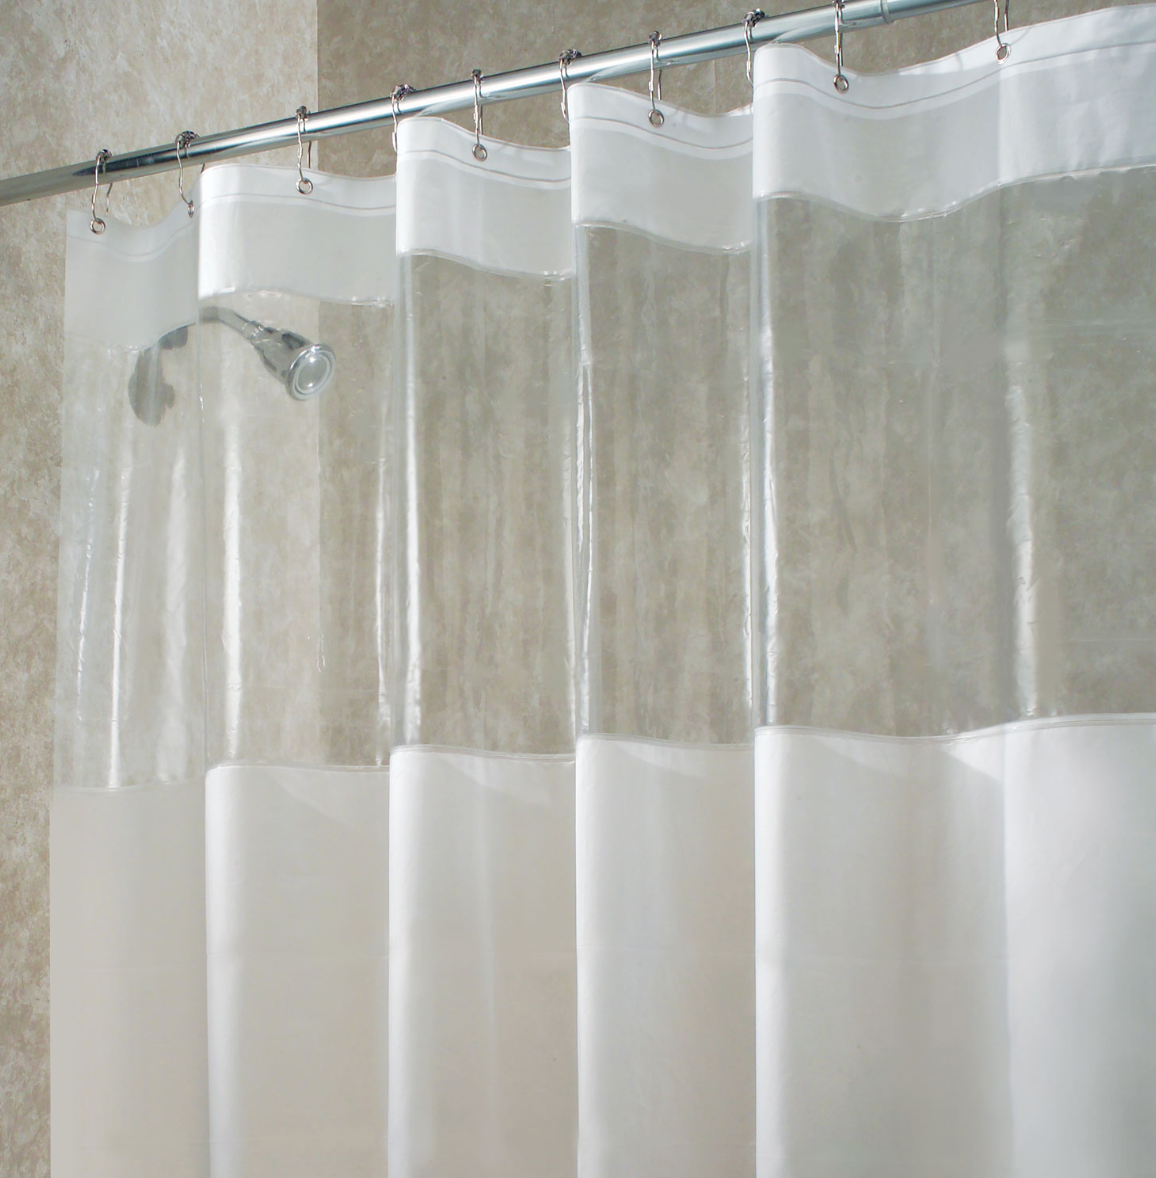 Can Plastic Shower Curtains Be Washed?